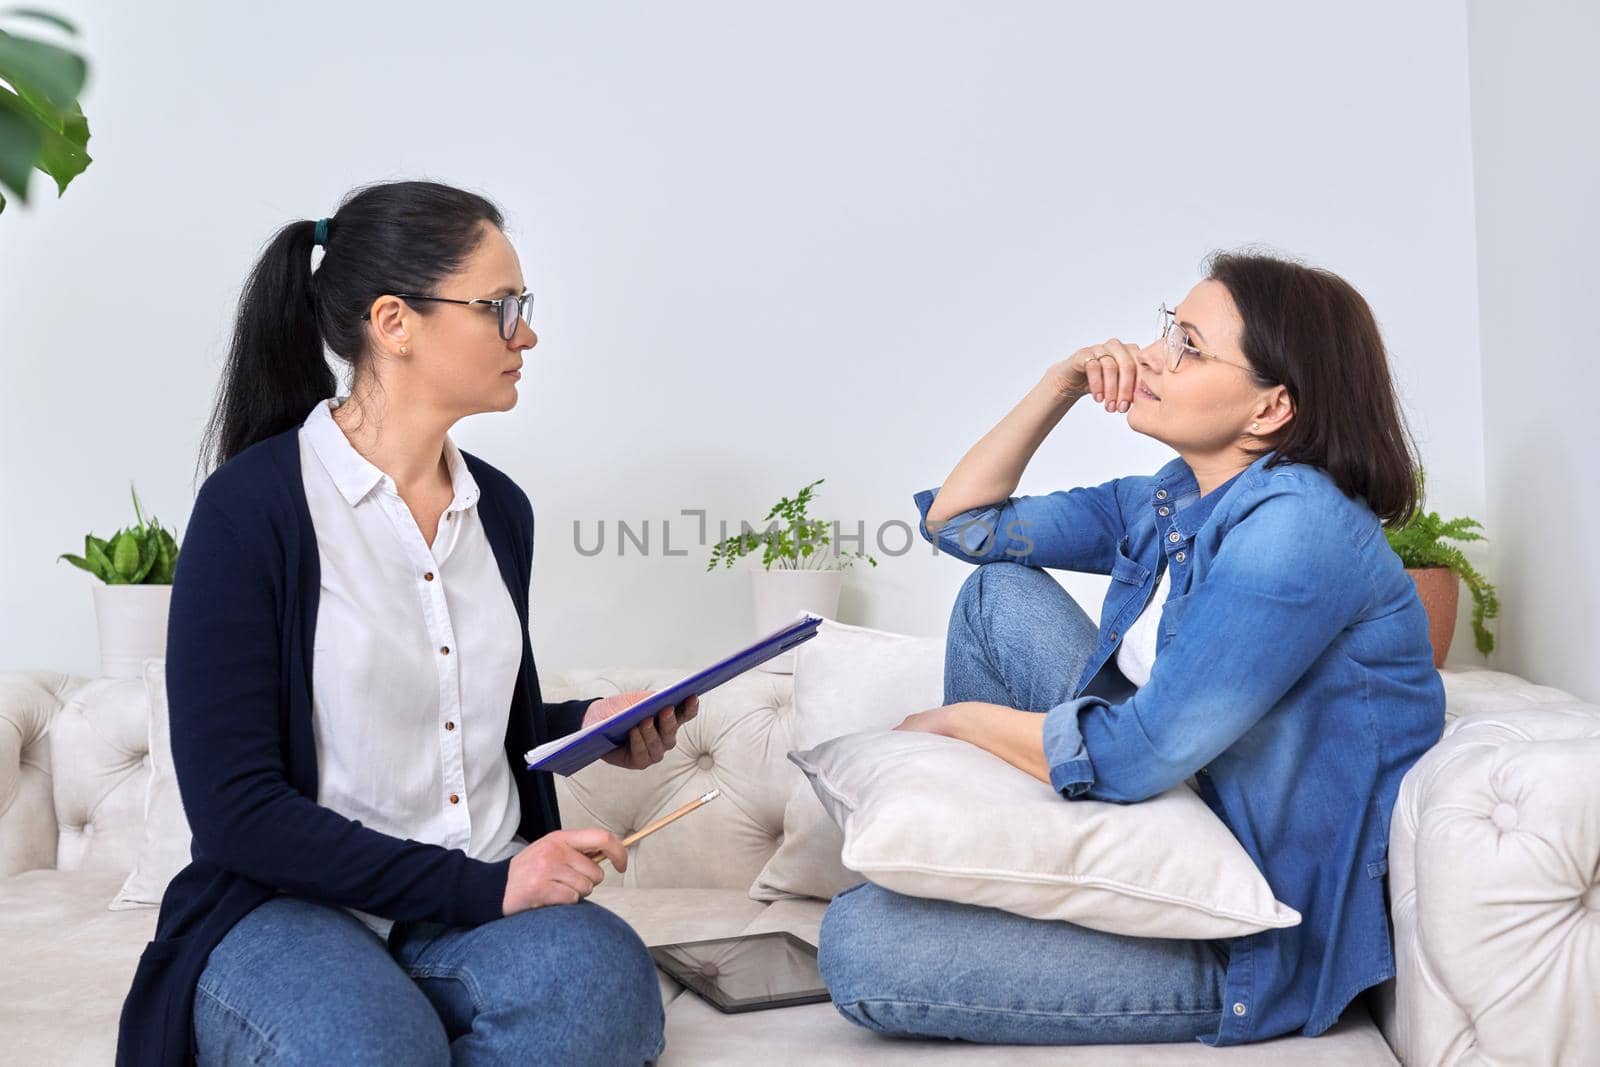 Mature woman at meeting with psychologist, therapist, counselor. Professional help, mental health of middle-aged people, social difficulties